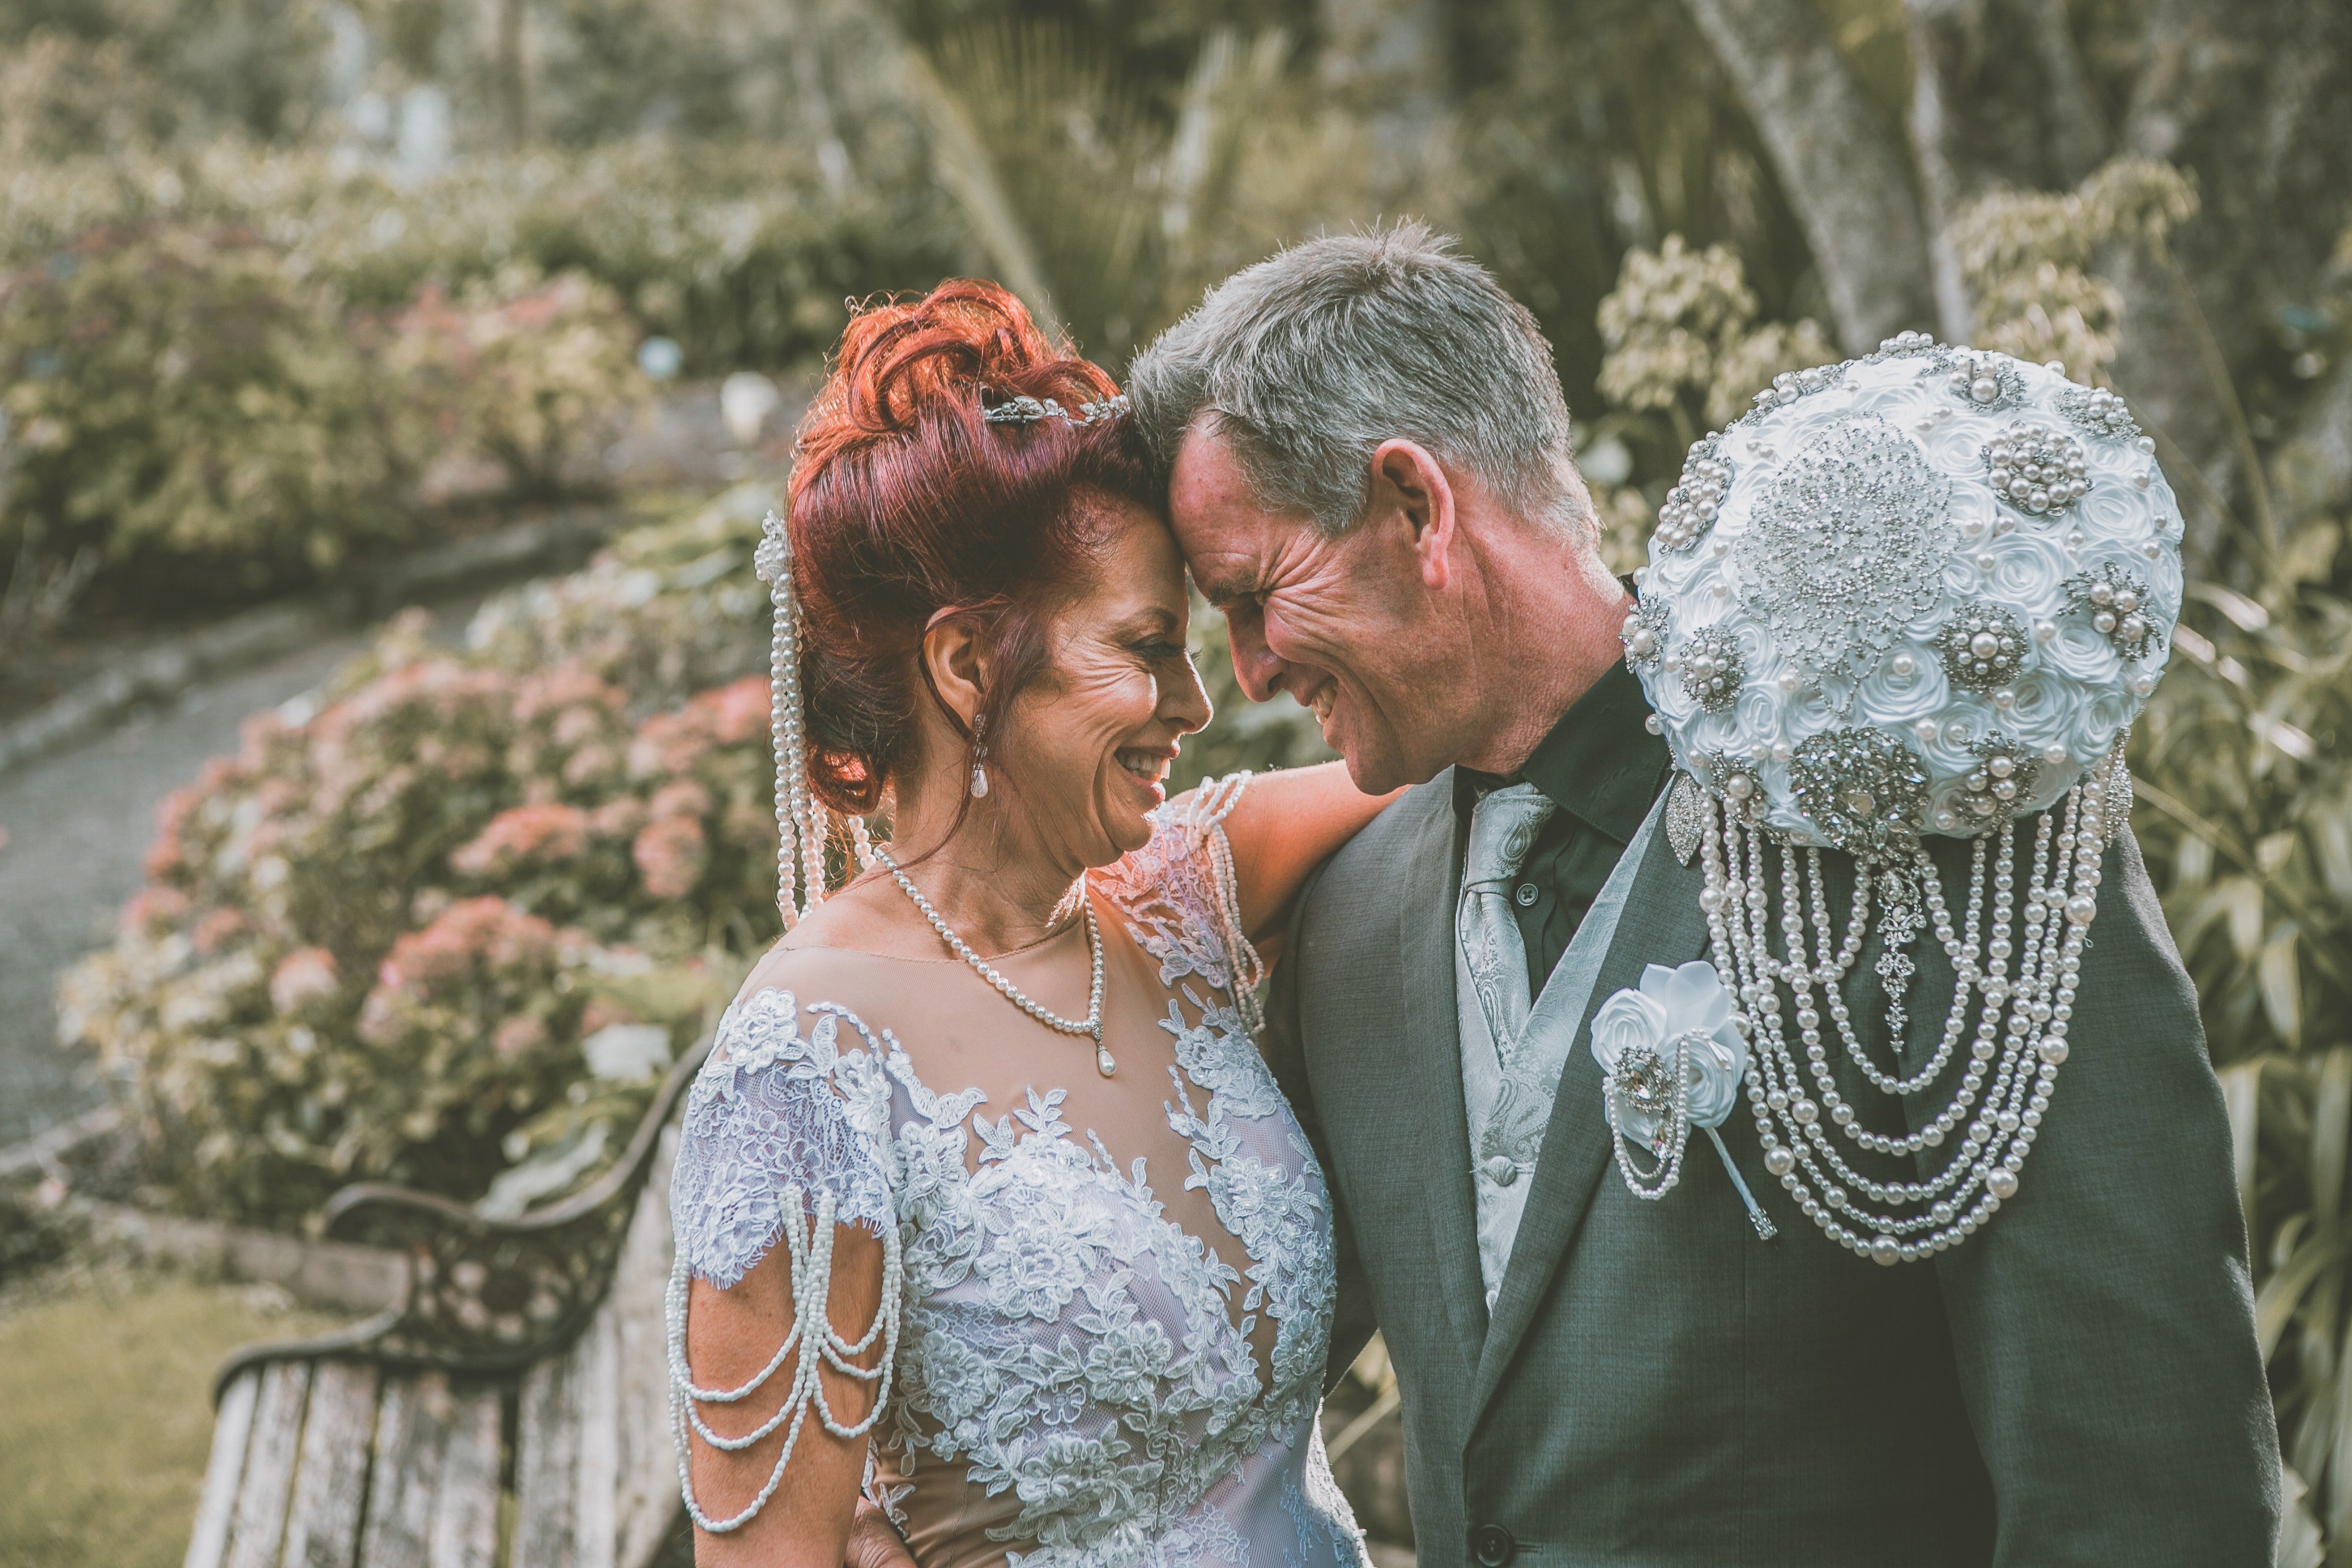 Sandra and Johnny married and lived a happy life. | Source: Pexels